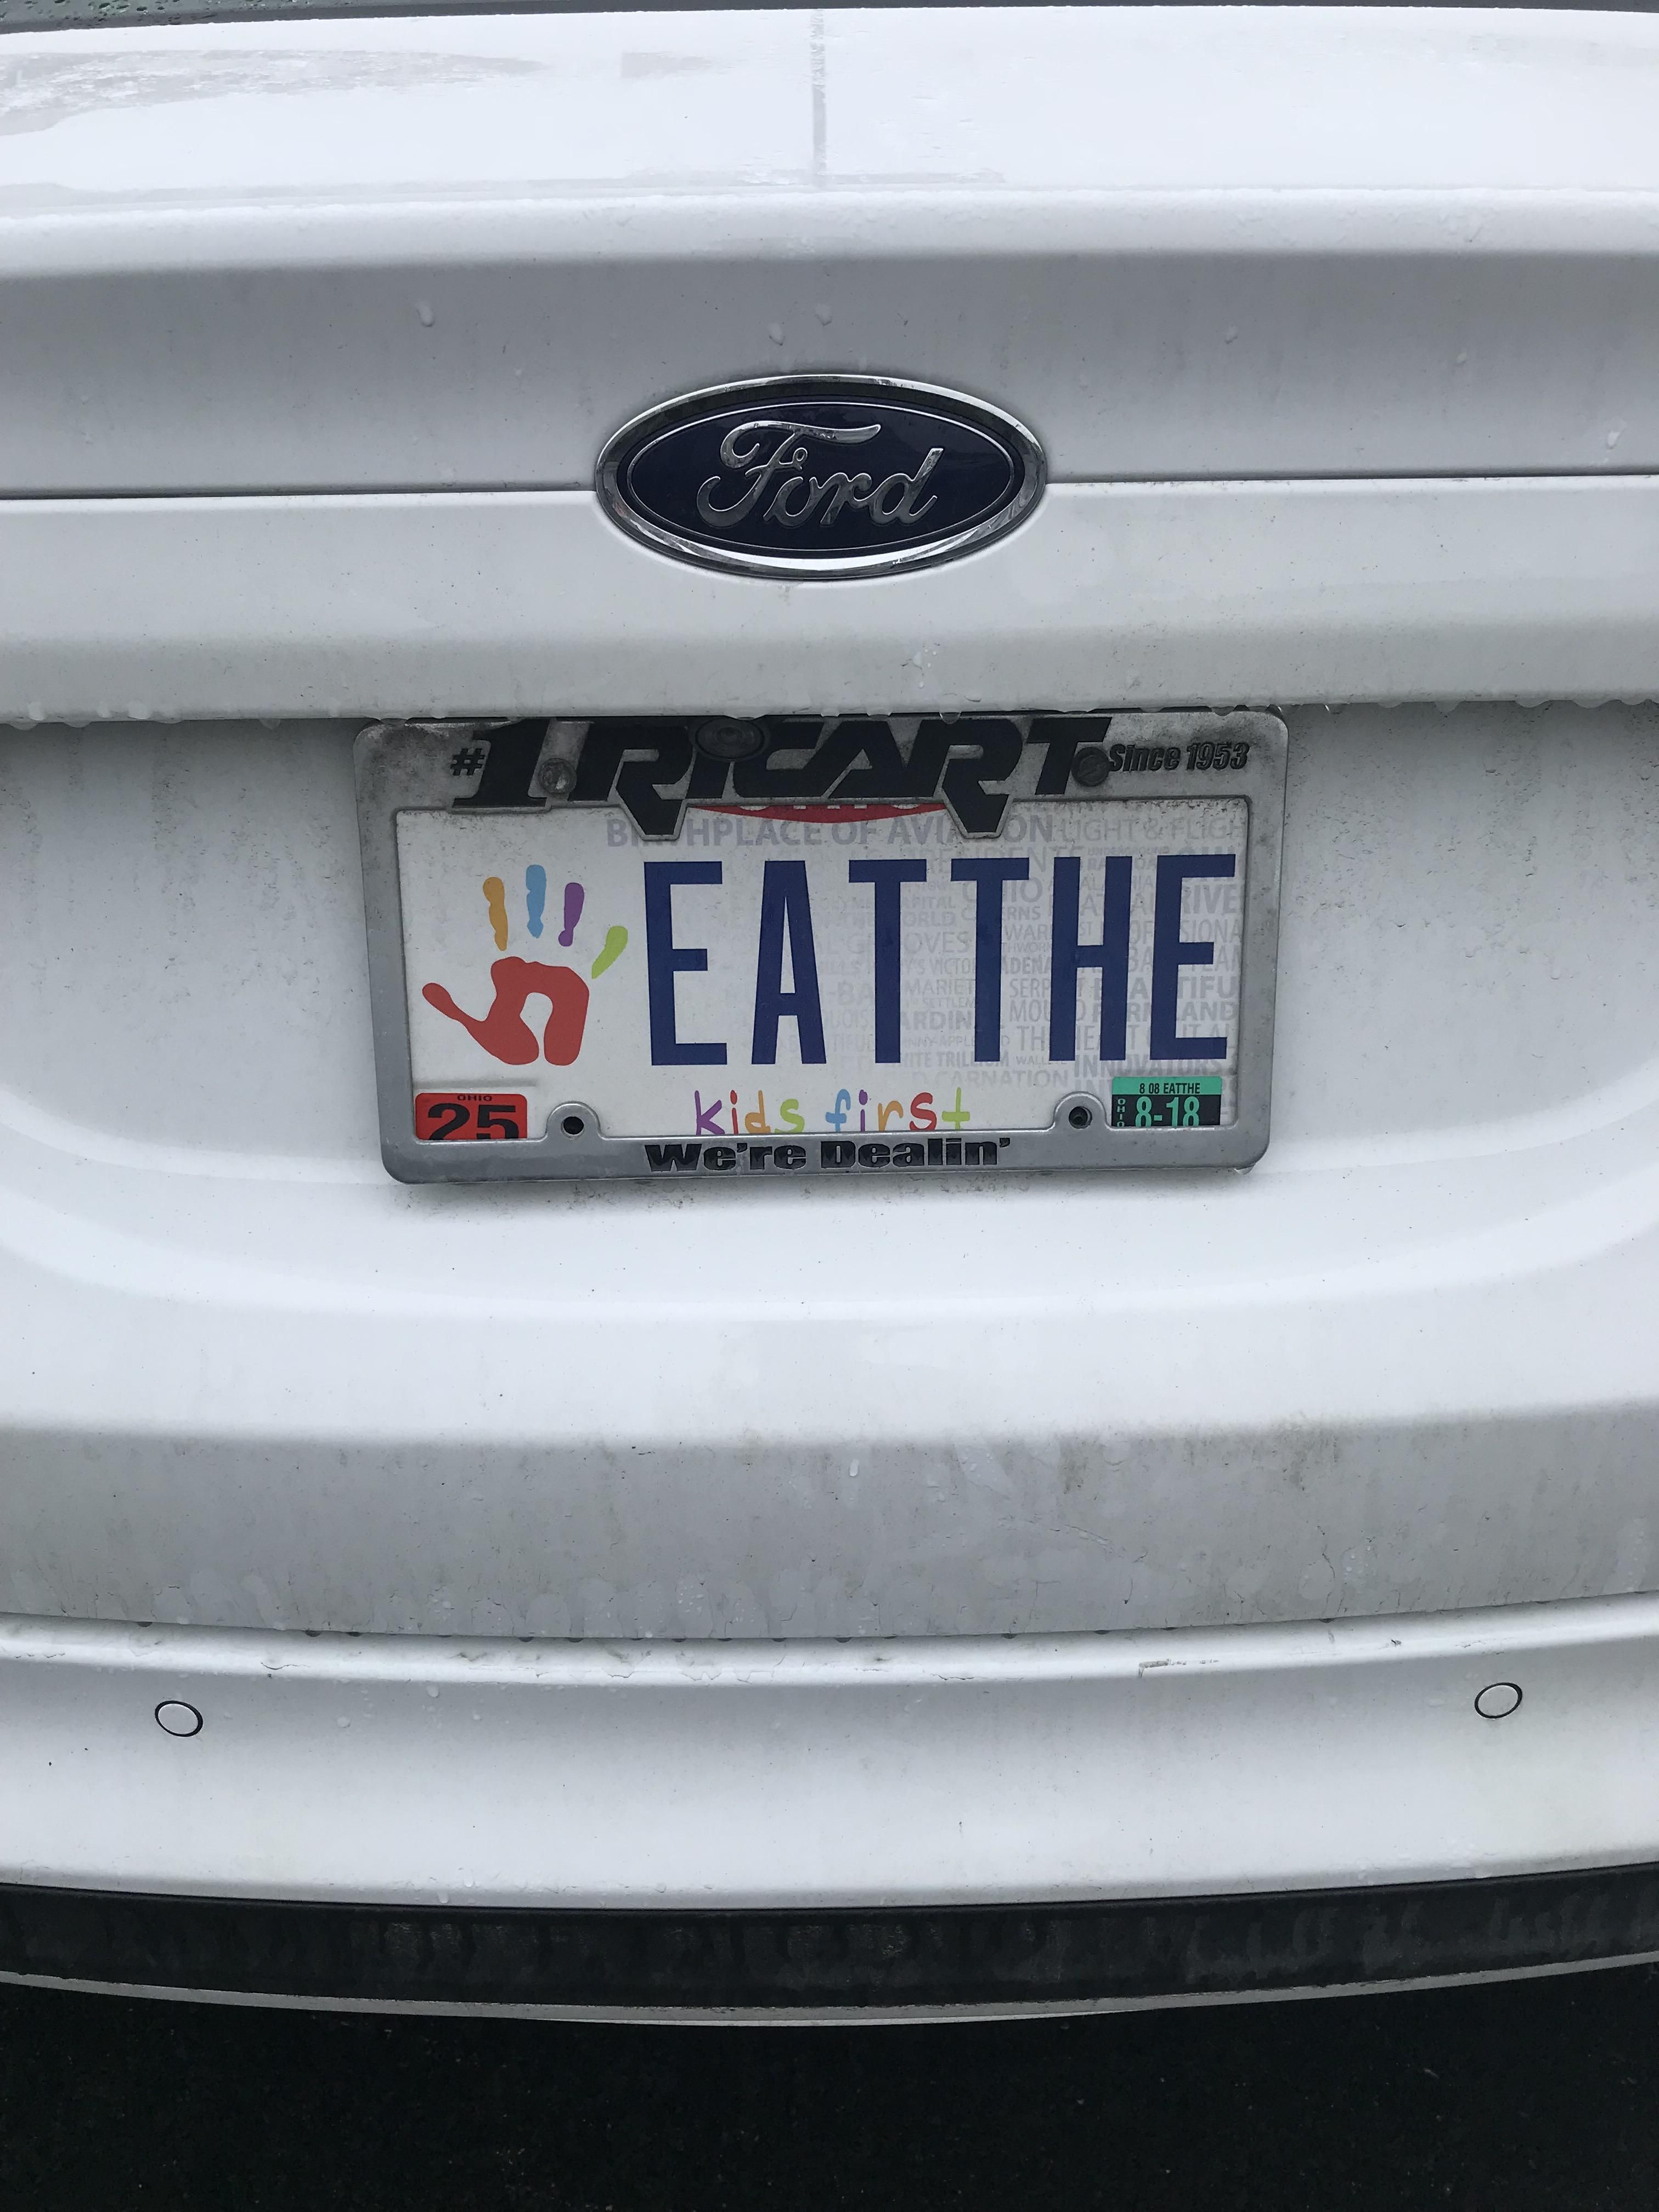 This license plate I found today.